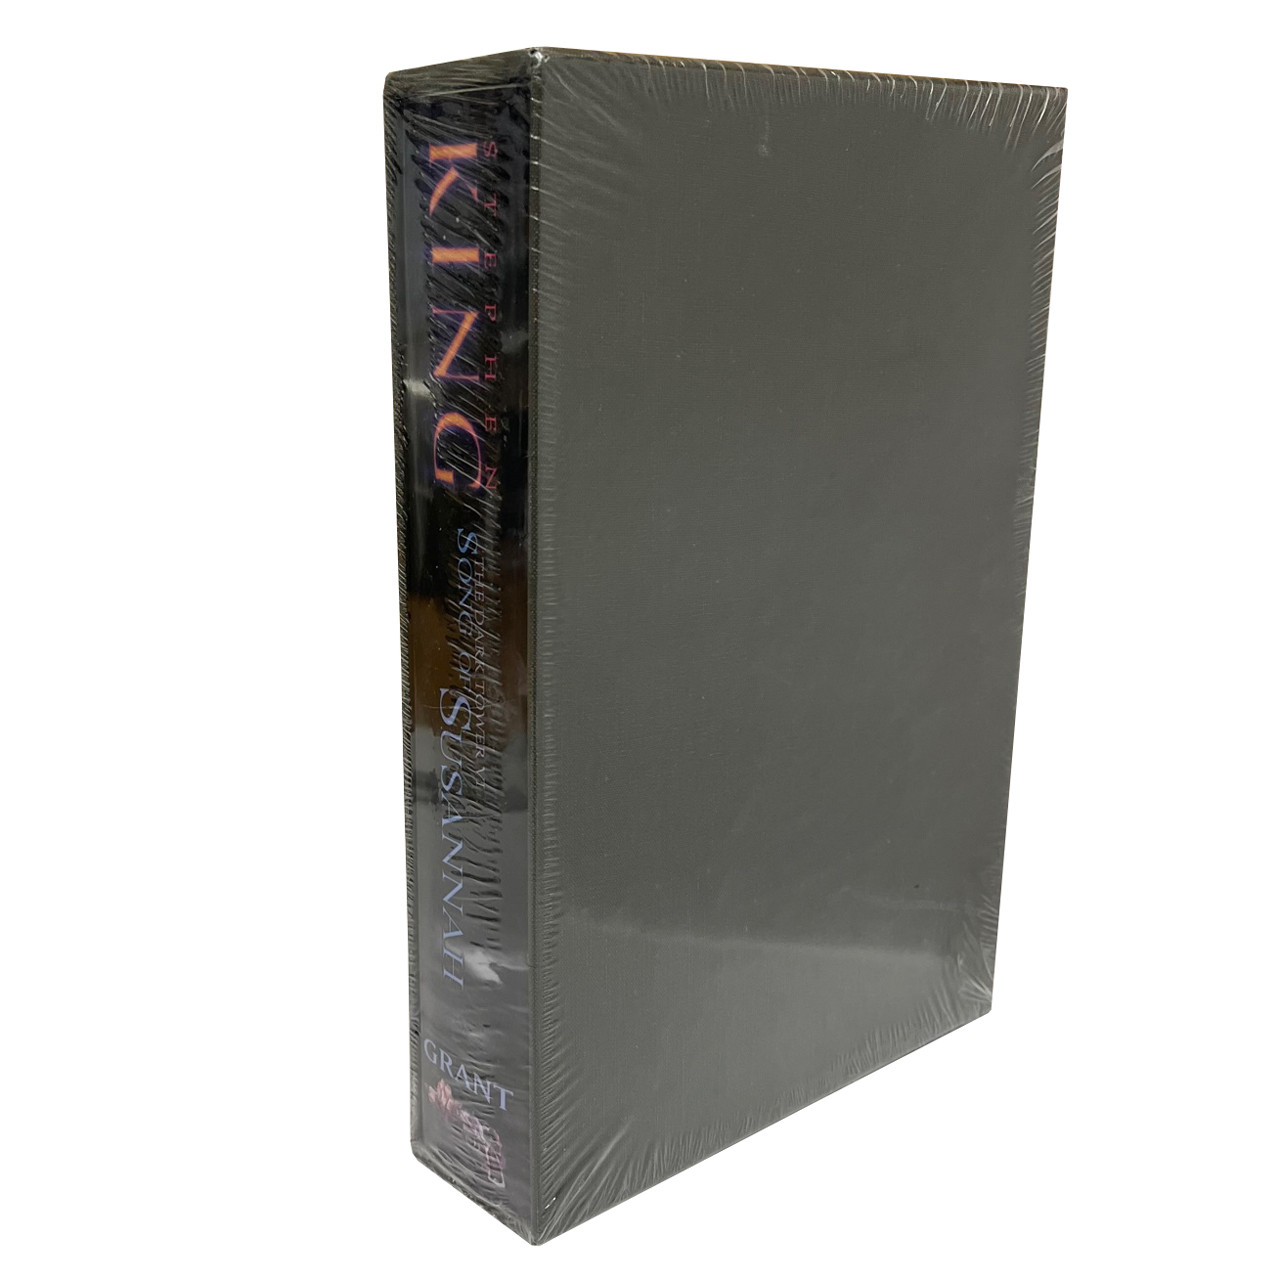 Stephen King "The Dark Tower" Signed Limited Edition, Partial Matching Numbers 11-Volume Set [Fine/Sealed]